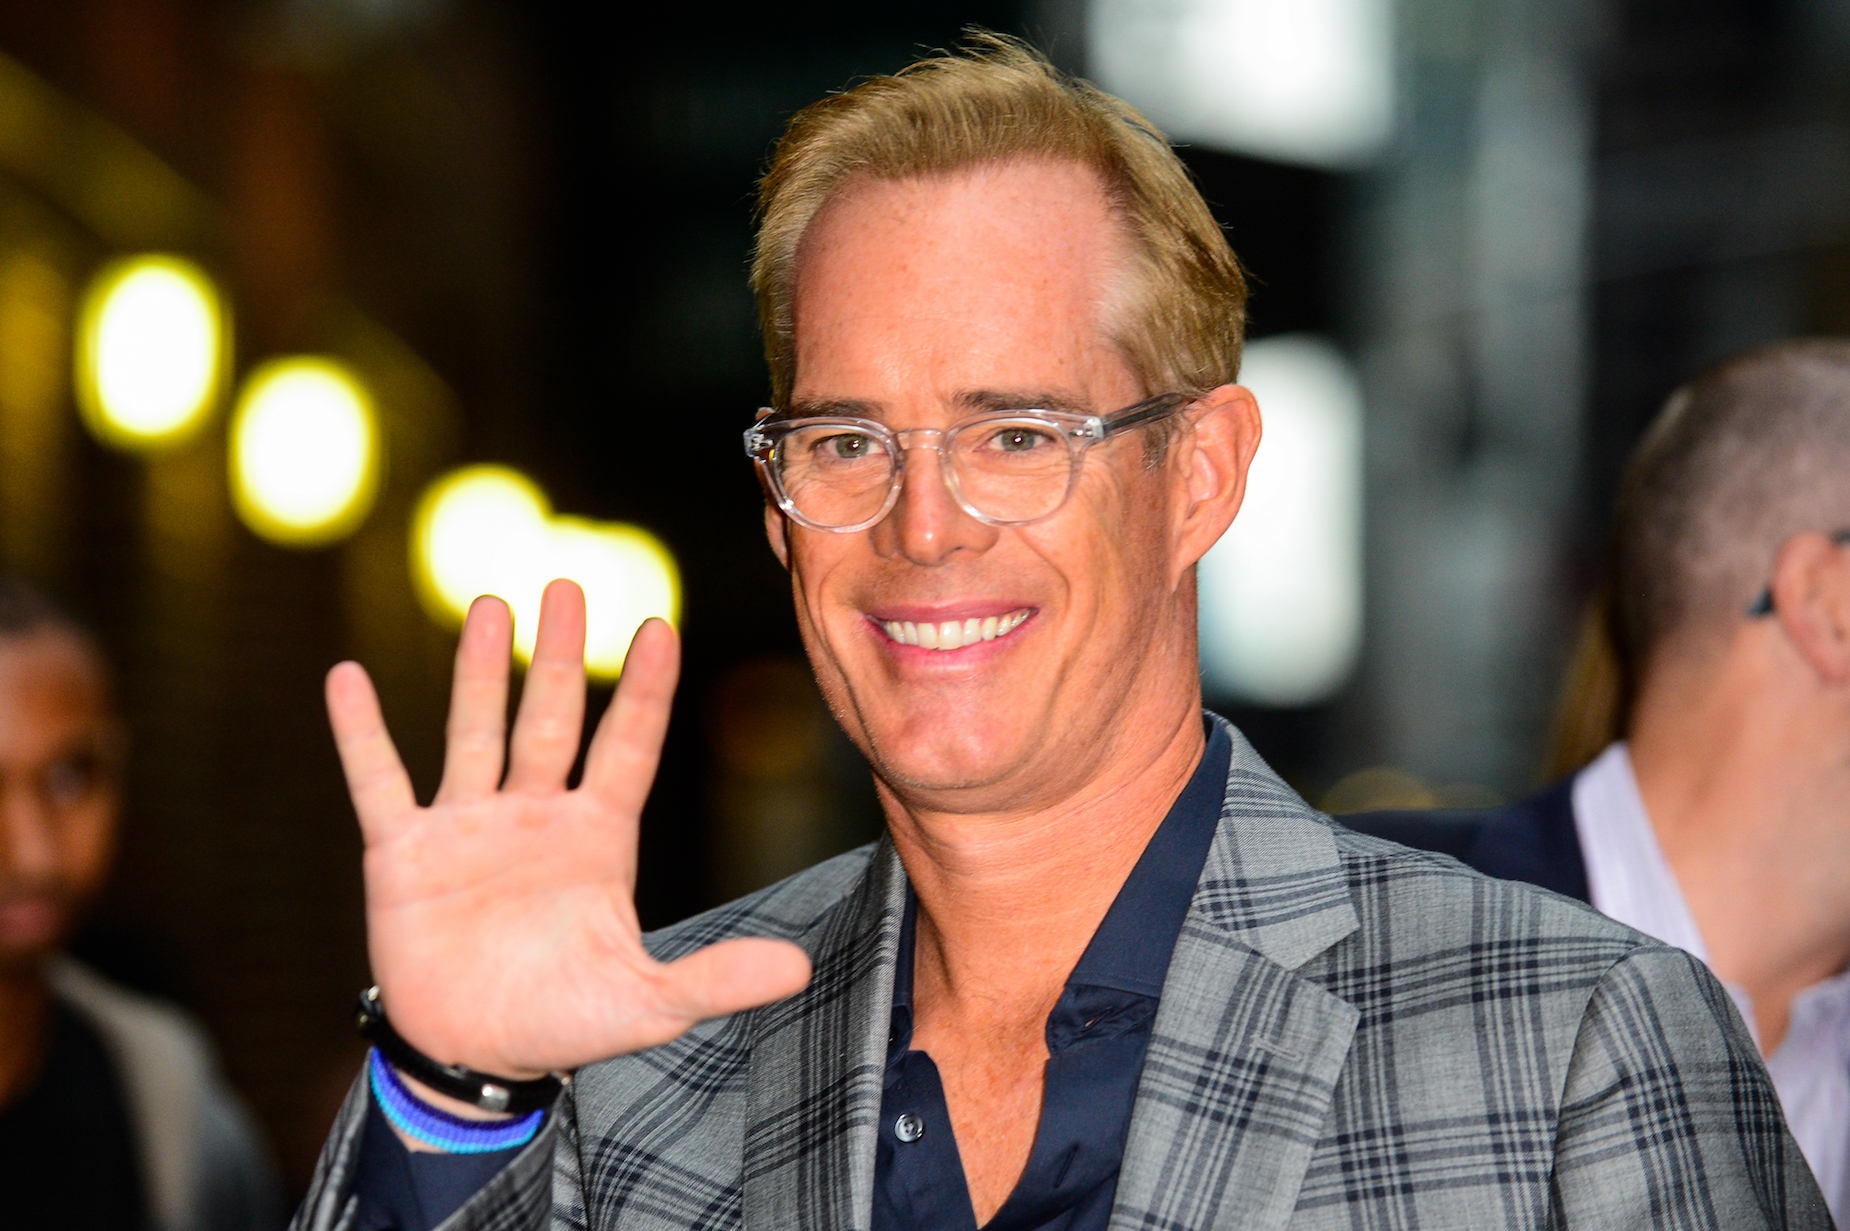 Joe Buck turned down a million-dollar adult film offer, but knows exactly what his stage name would be.